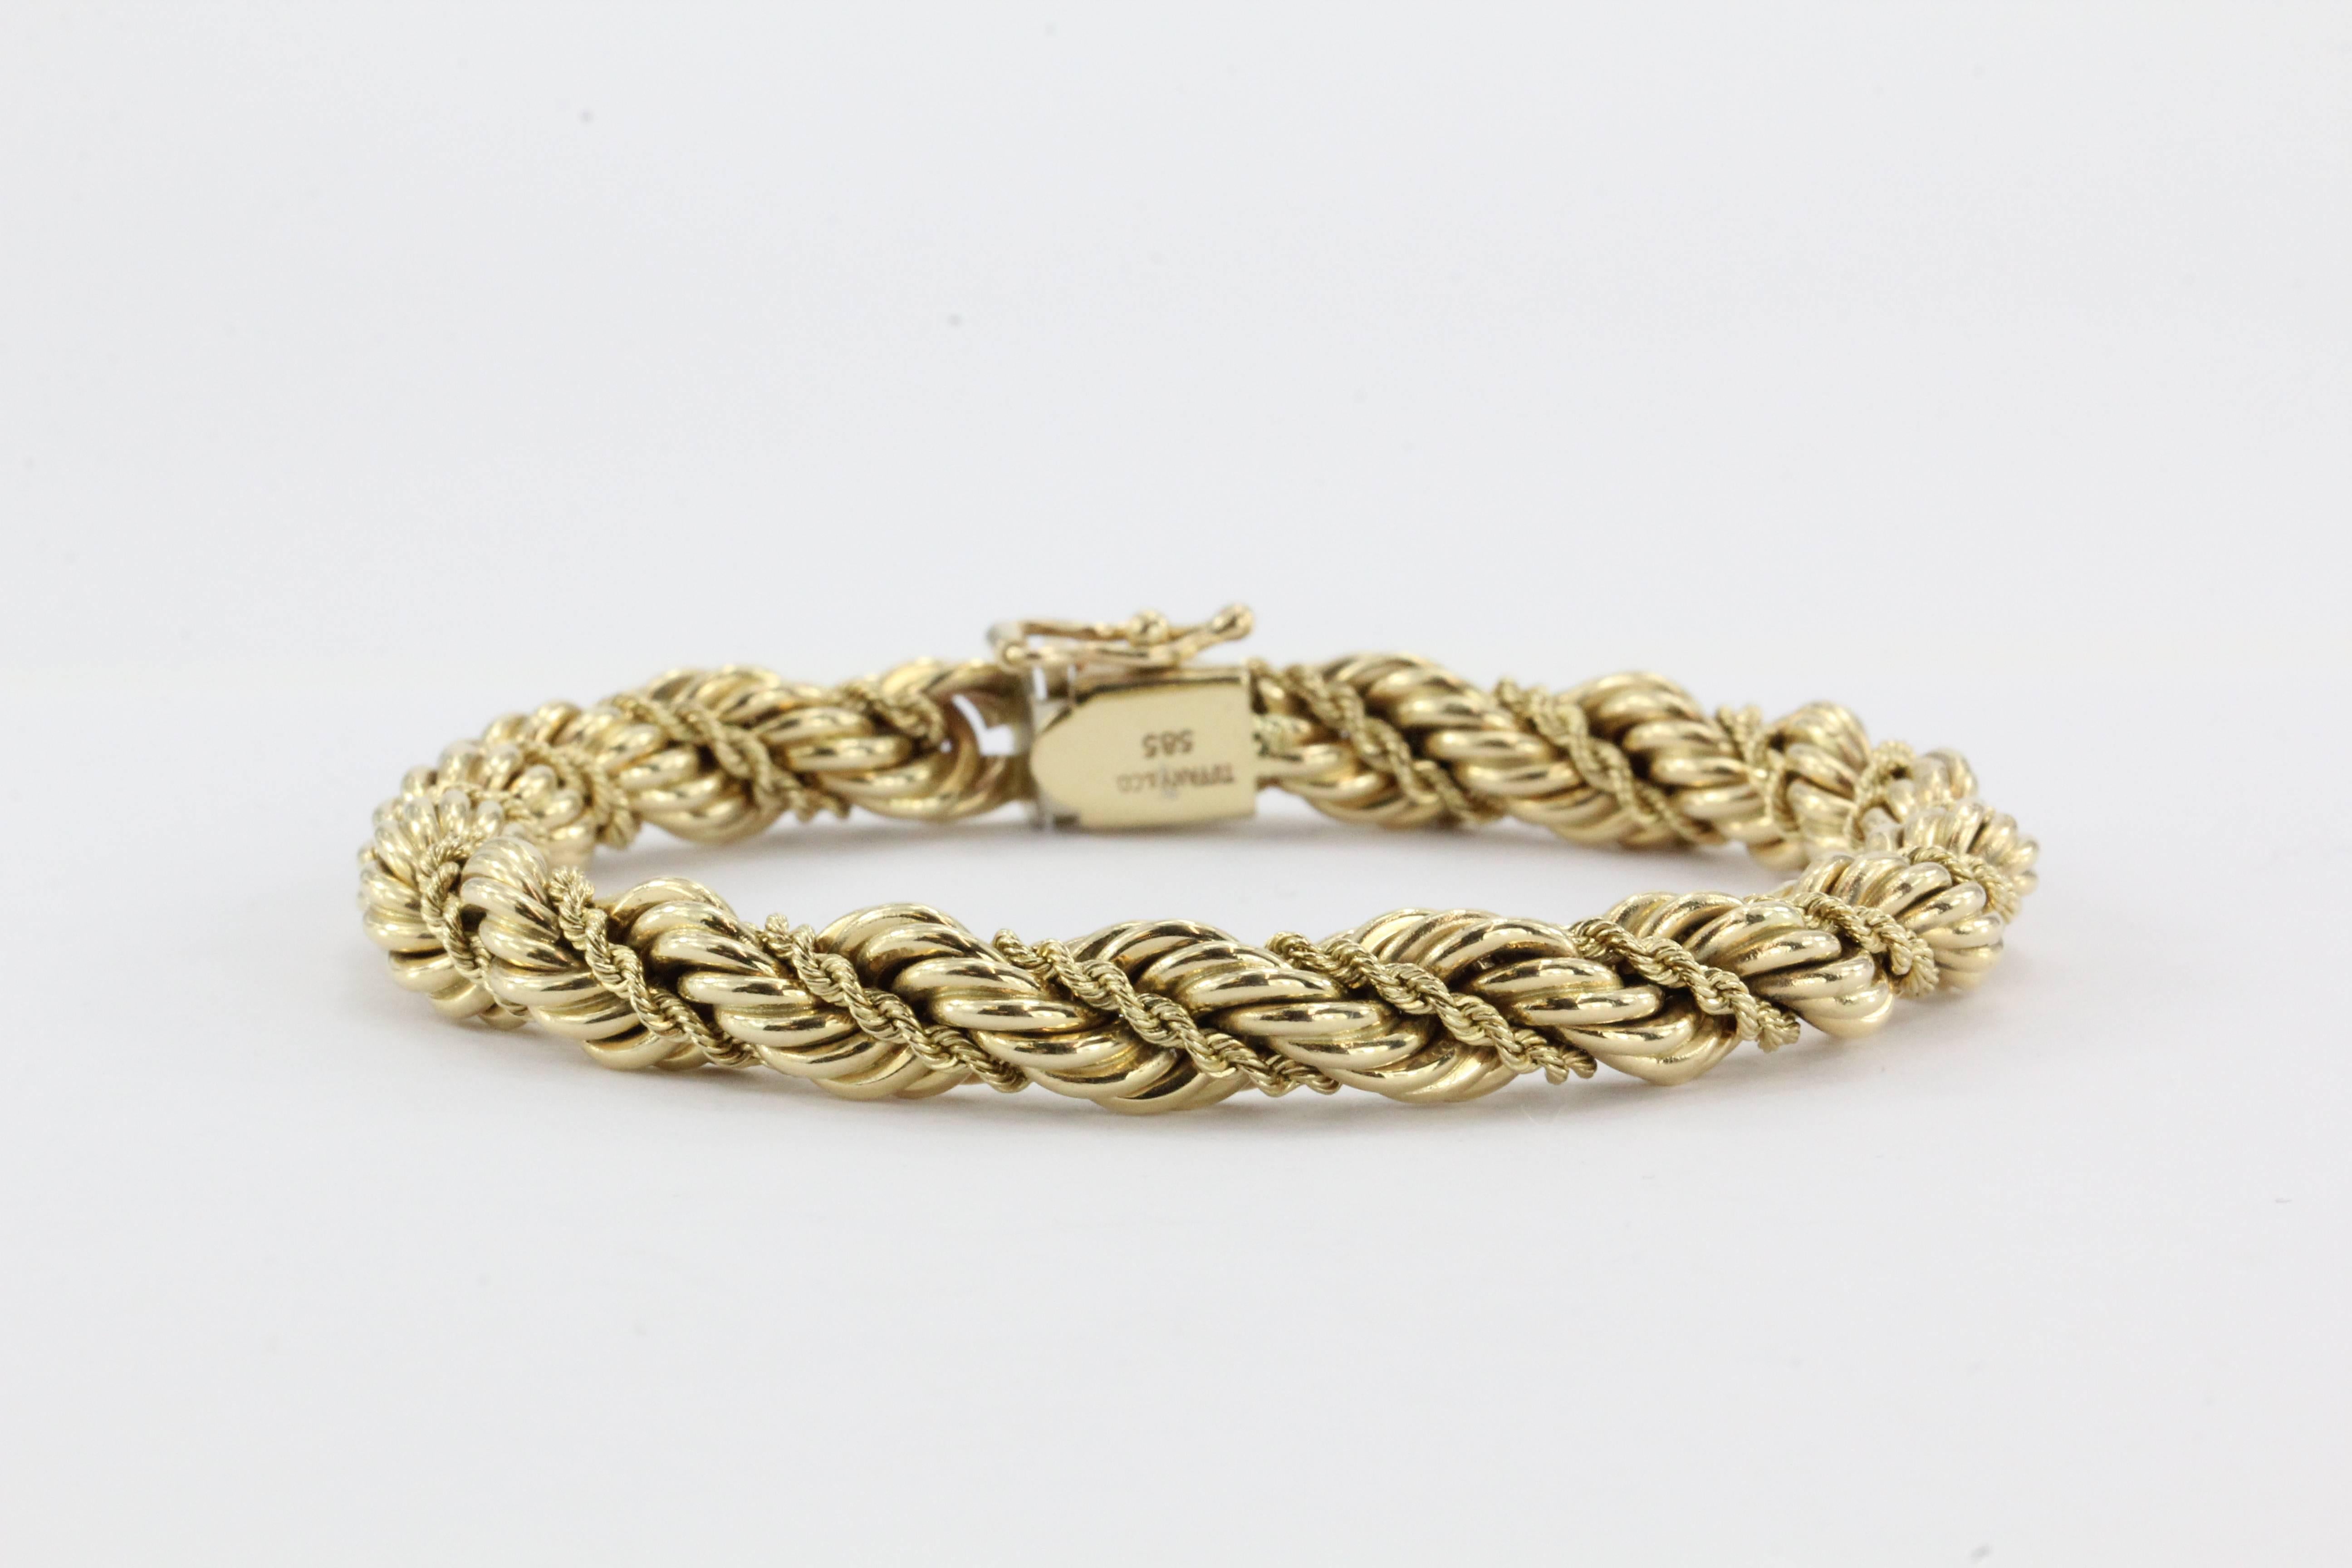 Tiffany & Co. Gold Thick Rope Bracelet. The piece is in great estate condition and ready to wear. There are some minor signs of wear that are only noticeable upon close inspections. Please see pictures for details. Does not come with box or pouch.